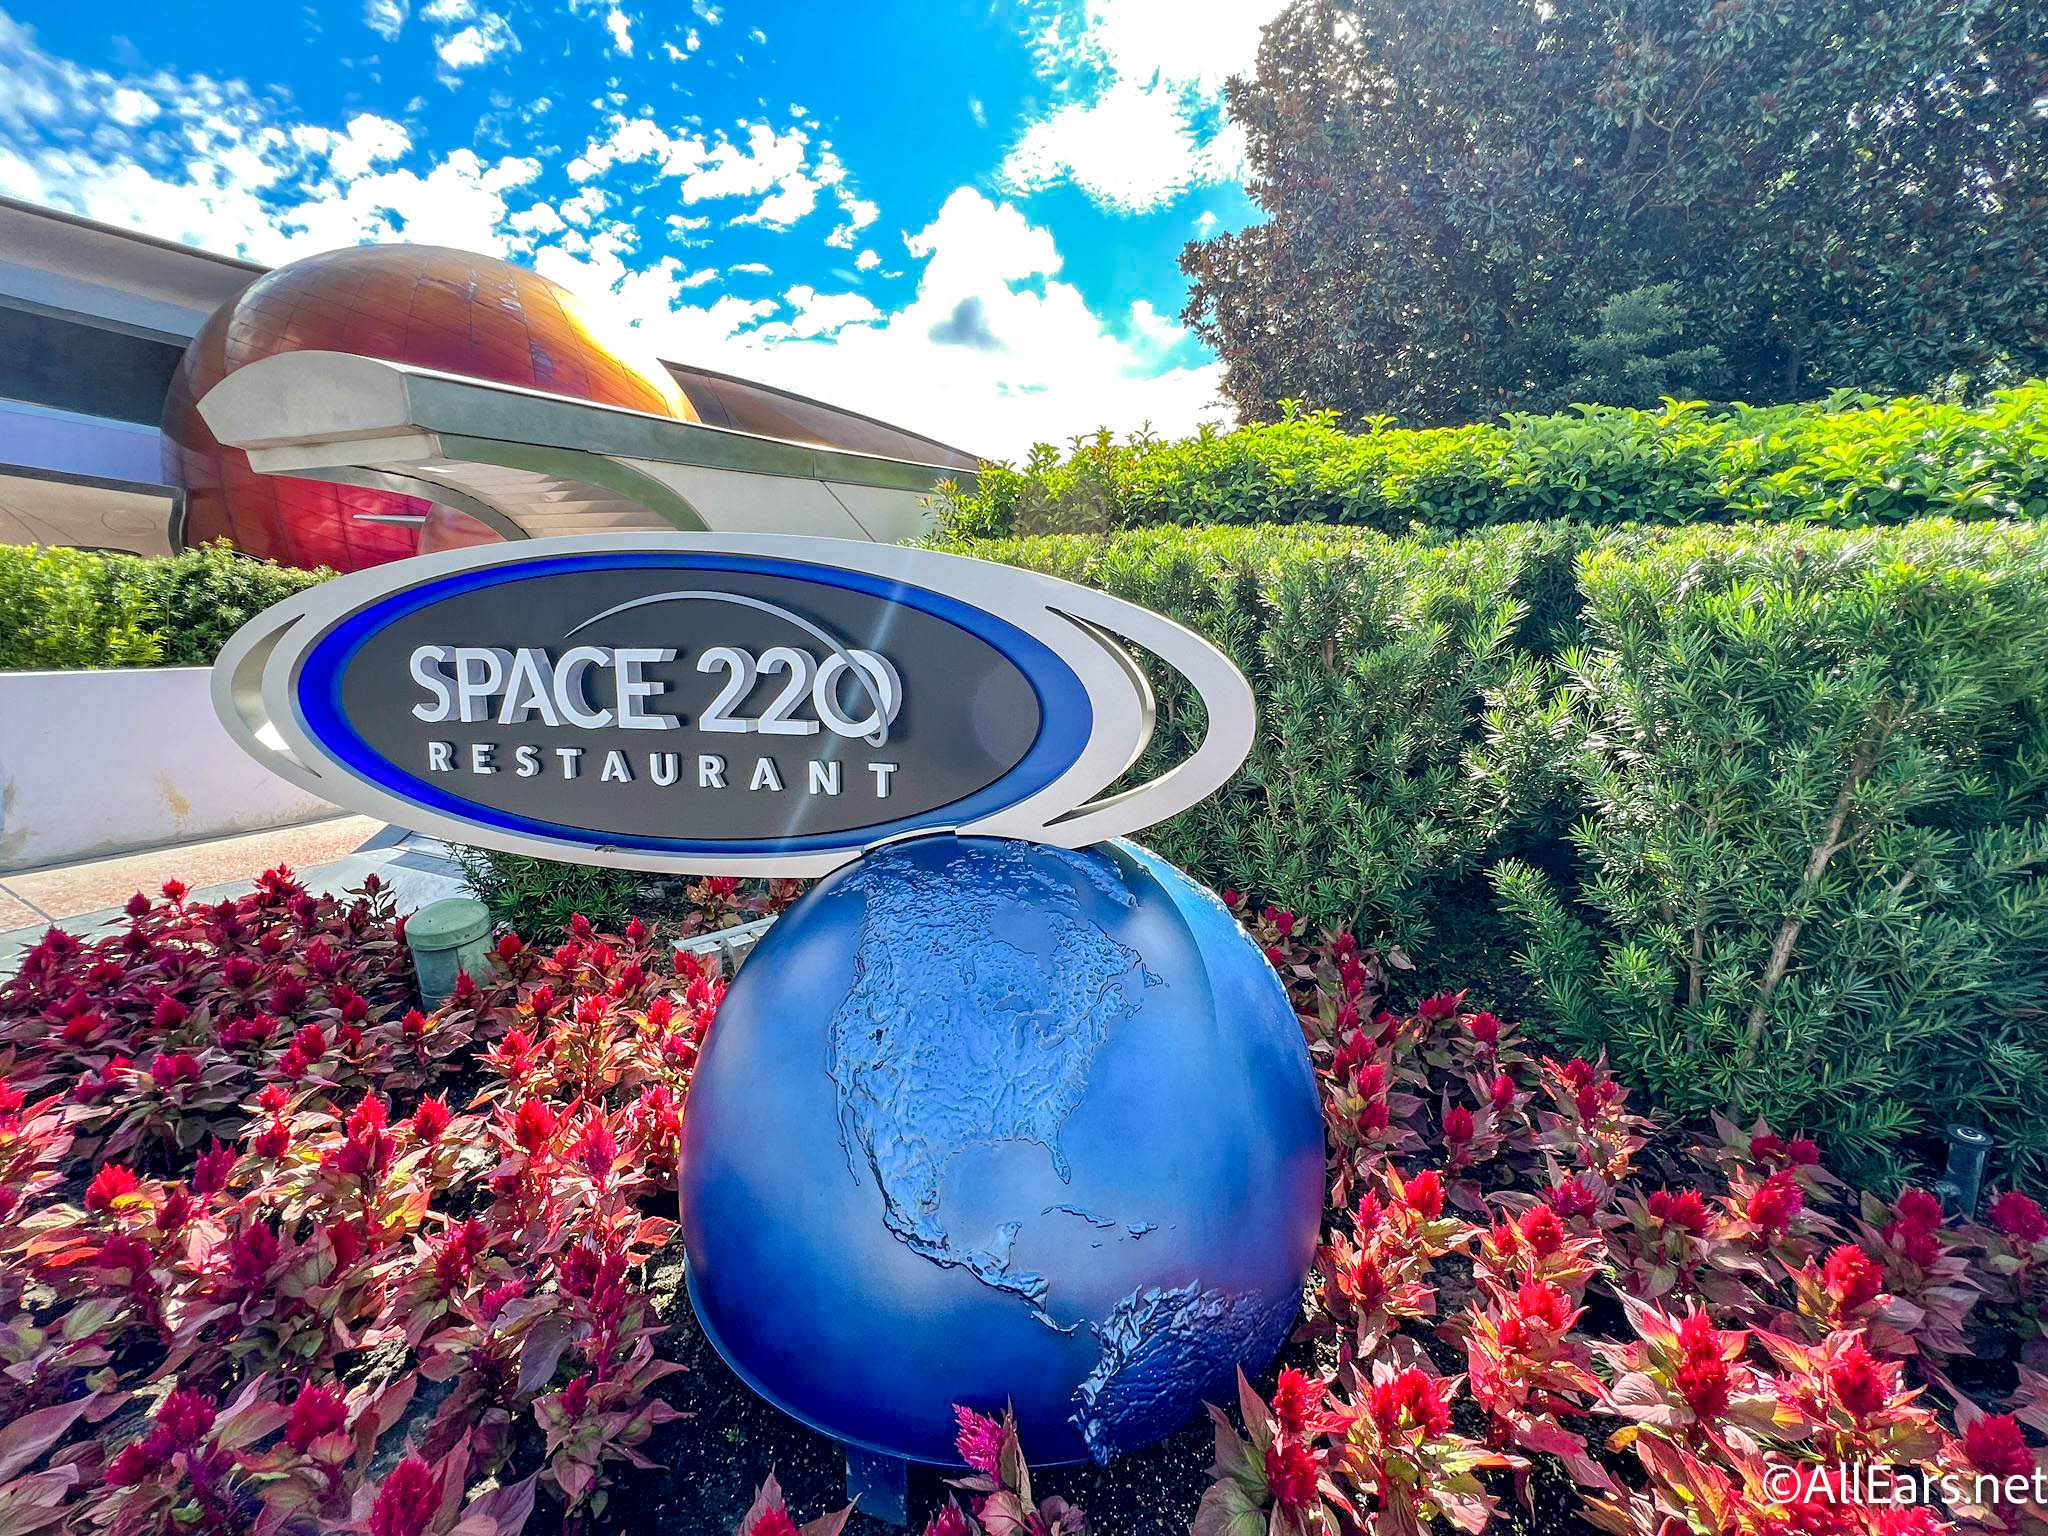 NEW Menu Items and FREE Souvenirs Arrive at Space 220 in EPCOT